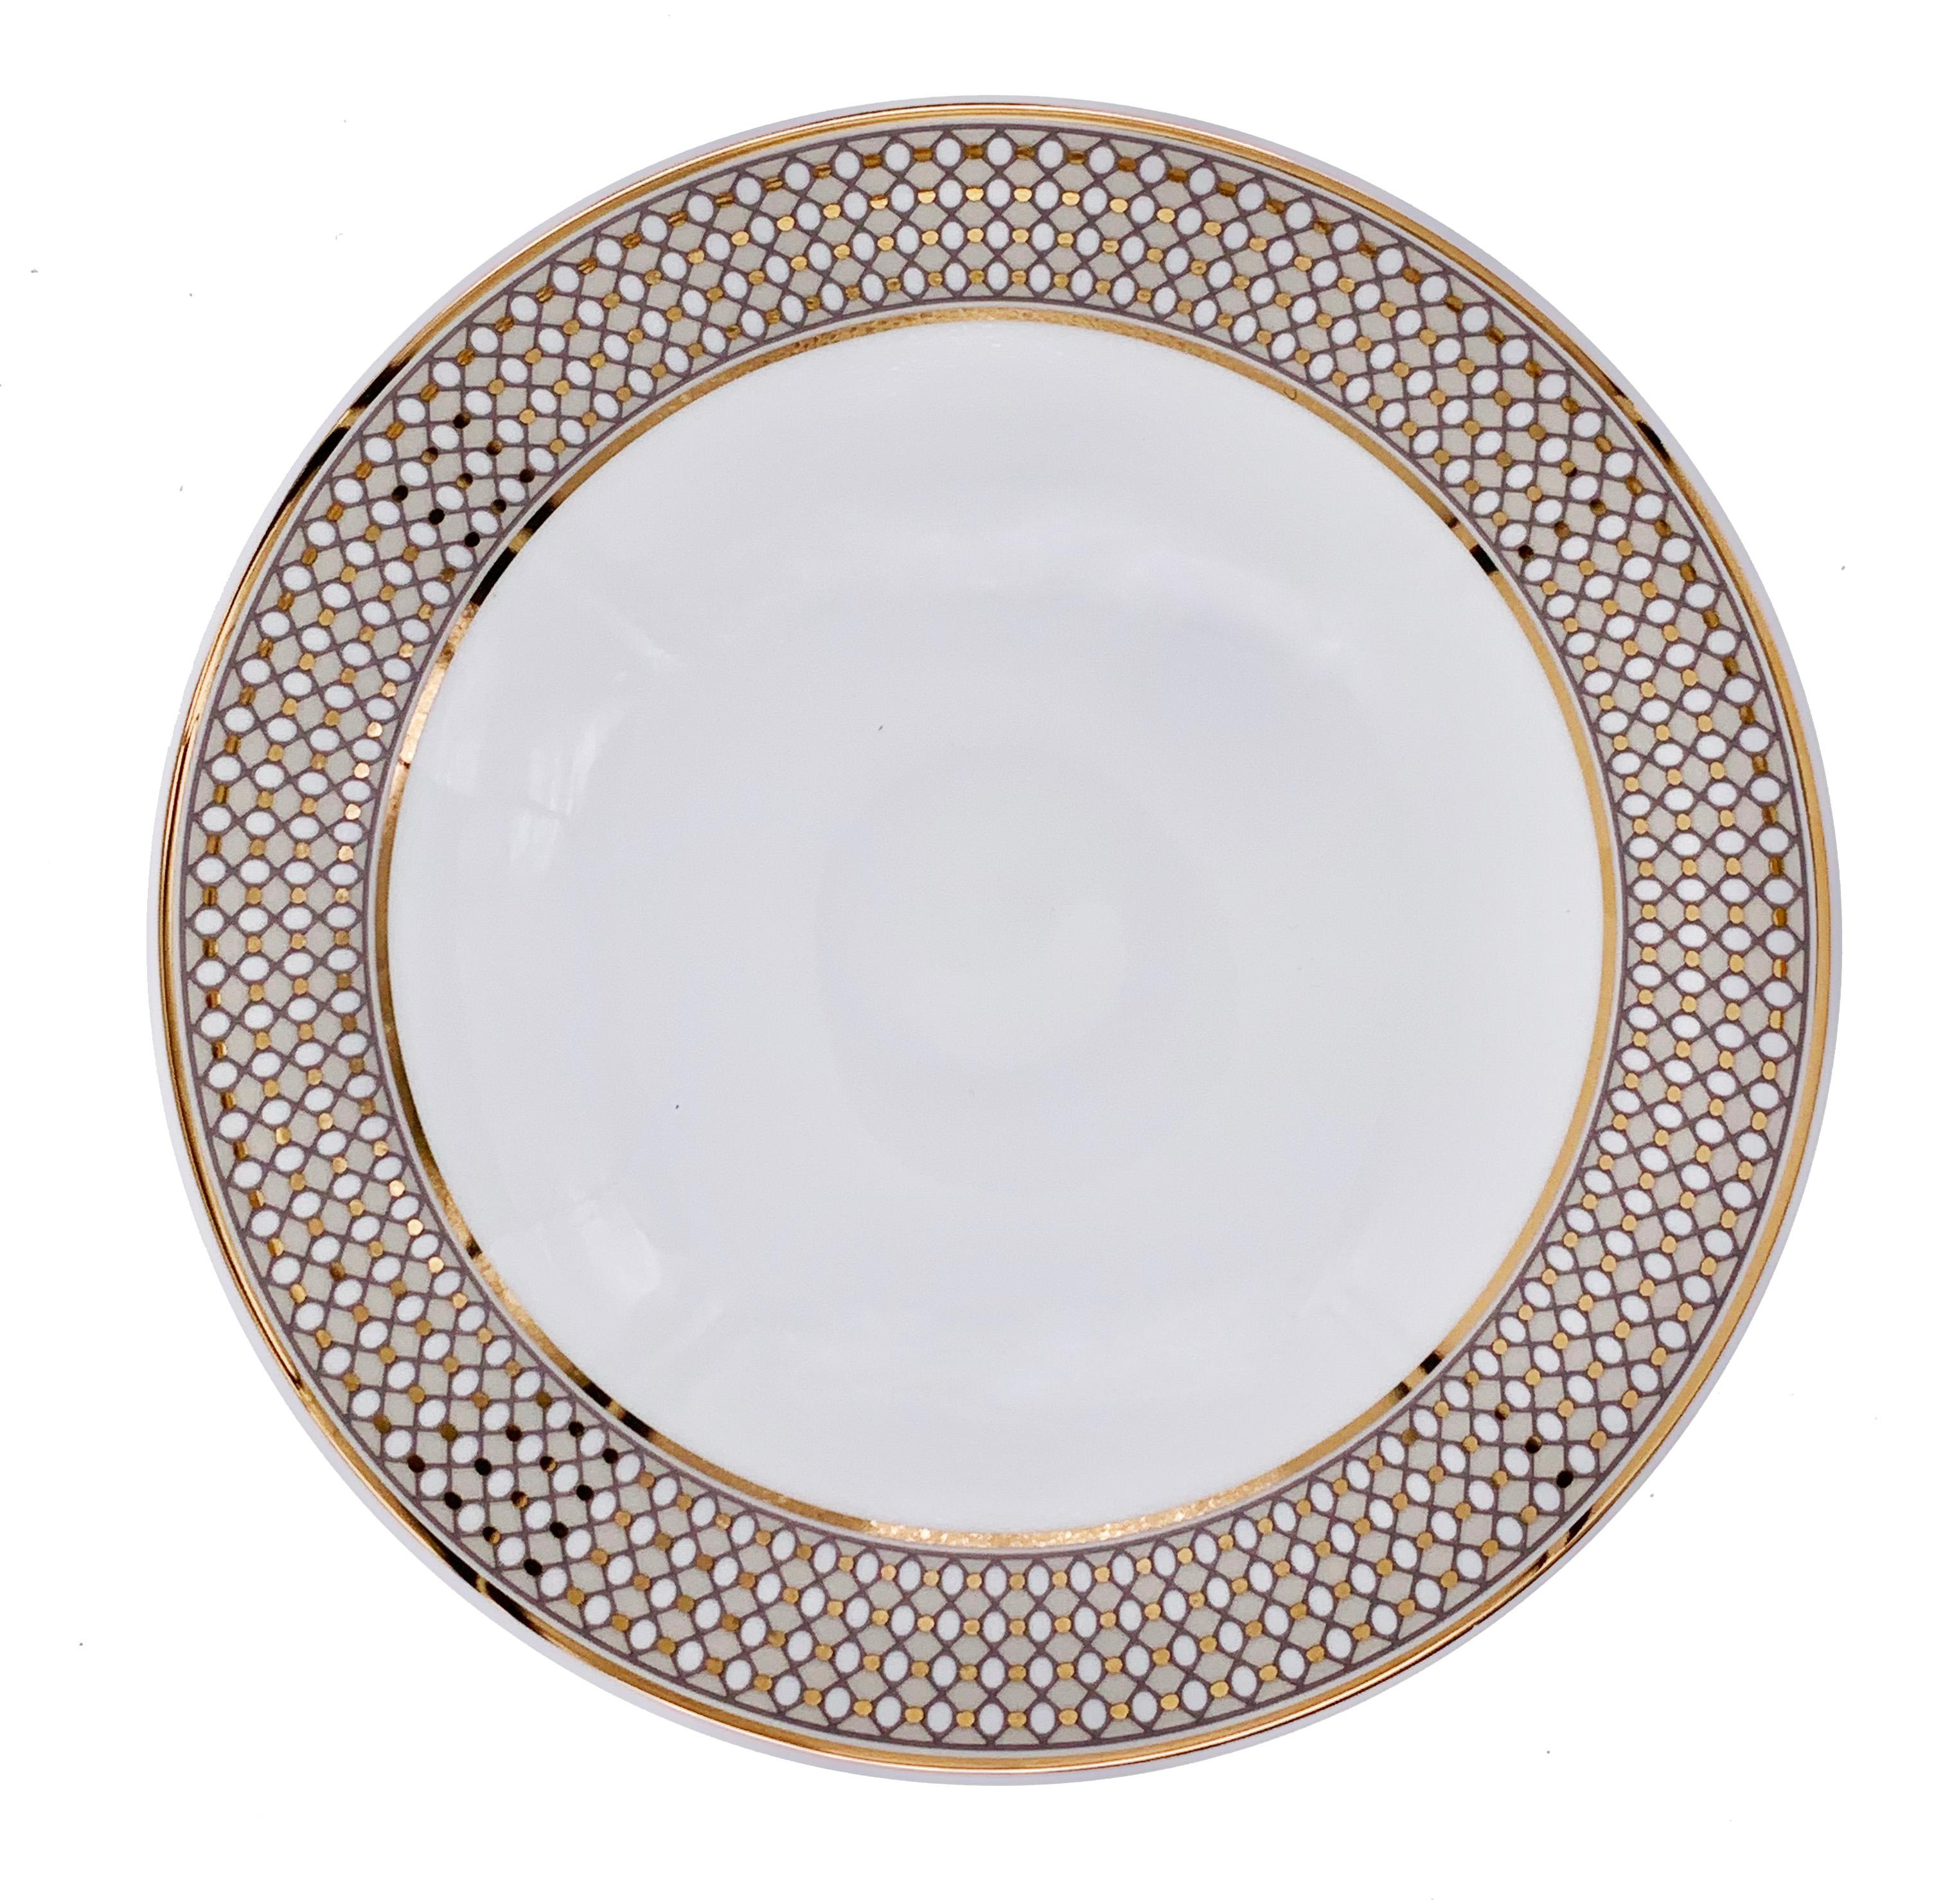 Larger quantities available upon request, with 8 weeks production time.

Set of 2 soup plate (2 pieces)
Color: Beige and gold
Size: 21 Ø x 5 H cm
Material: Porcelain and gold
Collection: Modern Vintage.